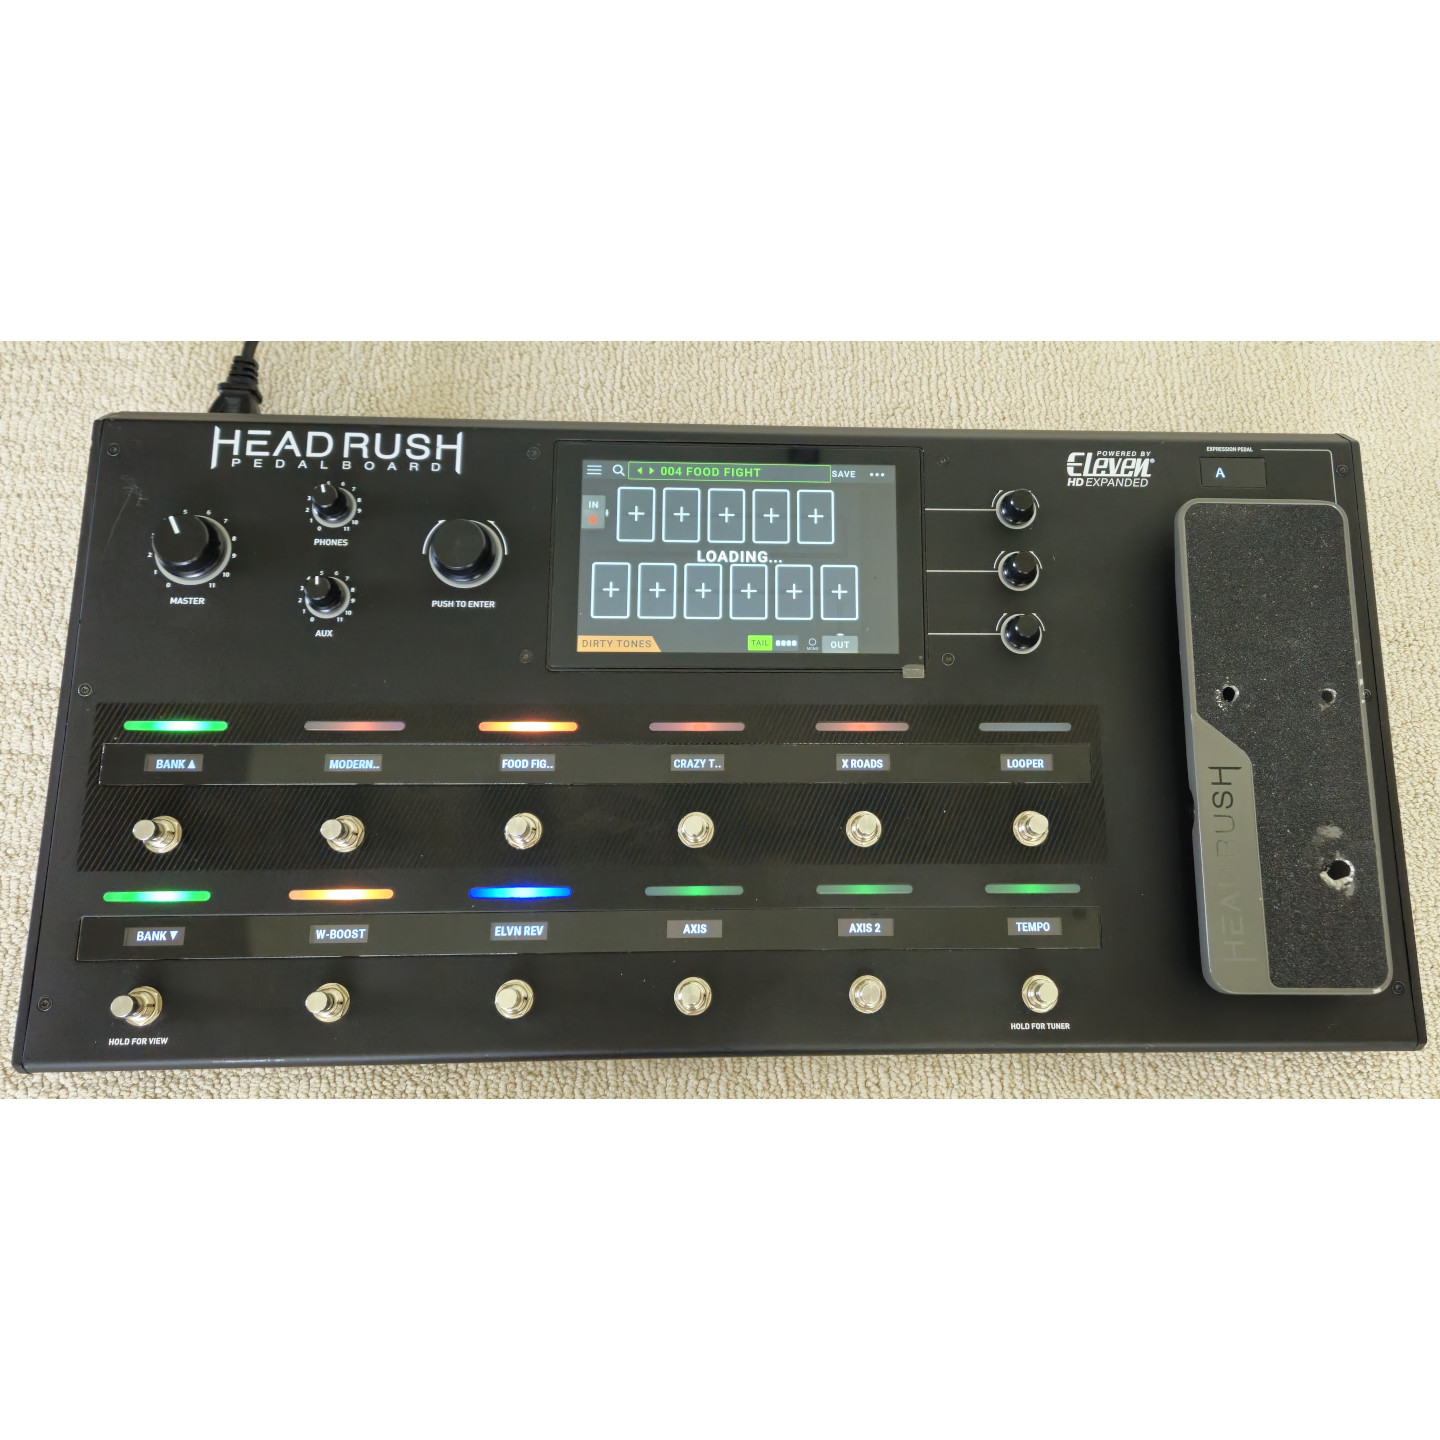 Headrush Pedalboard Amp and FX Modeling Multi-Effects Processor